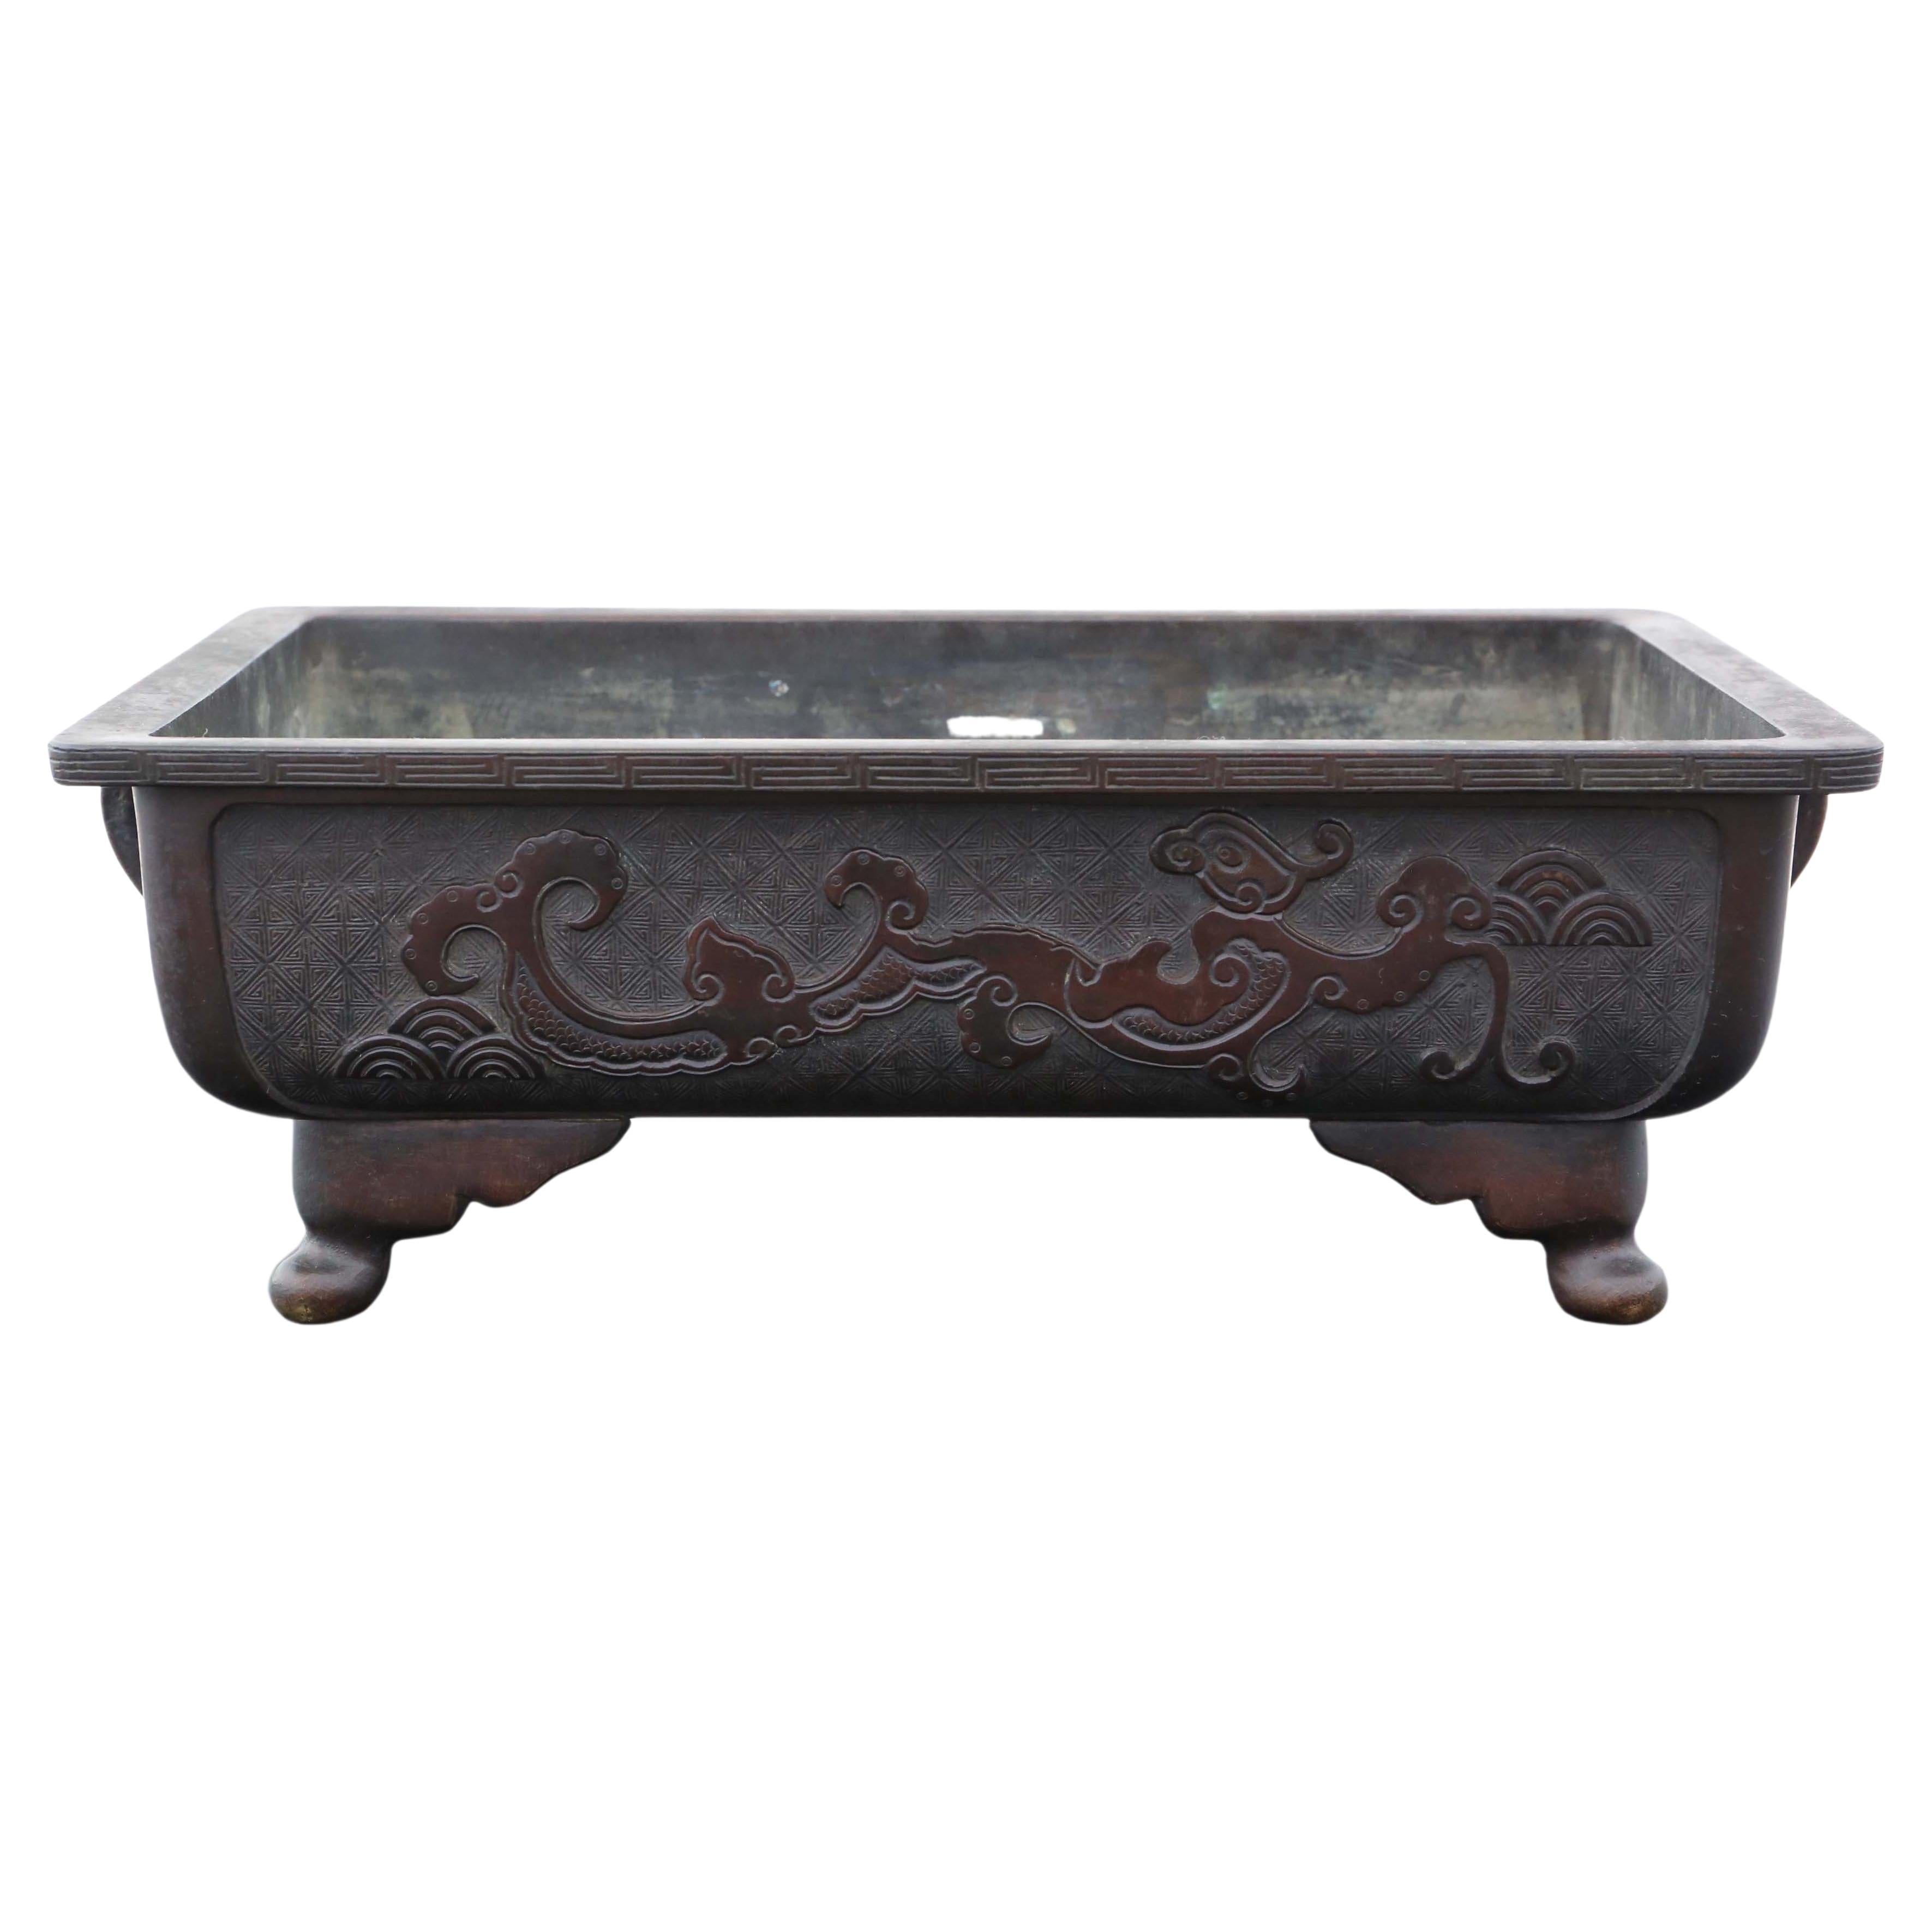 Antique Oriental Japanese Bronze Bowl Planter Jardinière - Exquisite Meiji Period Piece!

This exceptional bronze bowl planter jardinière, hailing from the Meiji Period circa 1880, epitomizes the artistry and grace of Japanese craftsmanship. Crafted